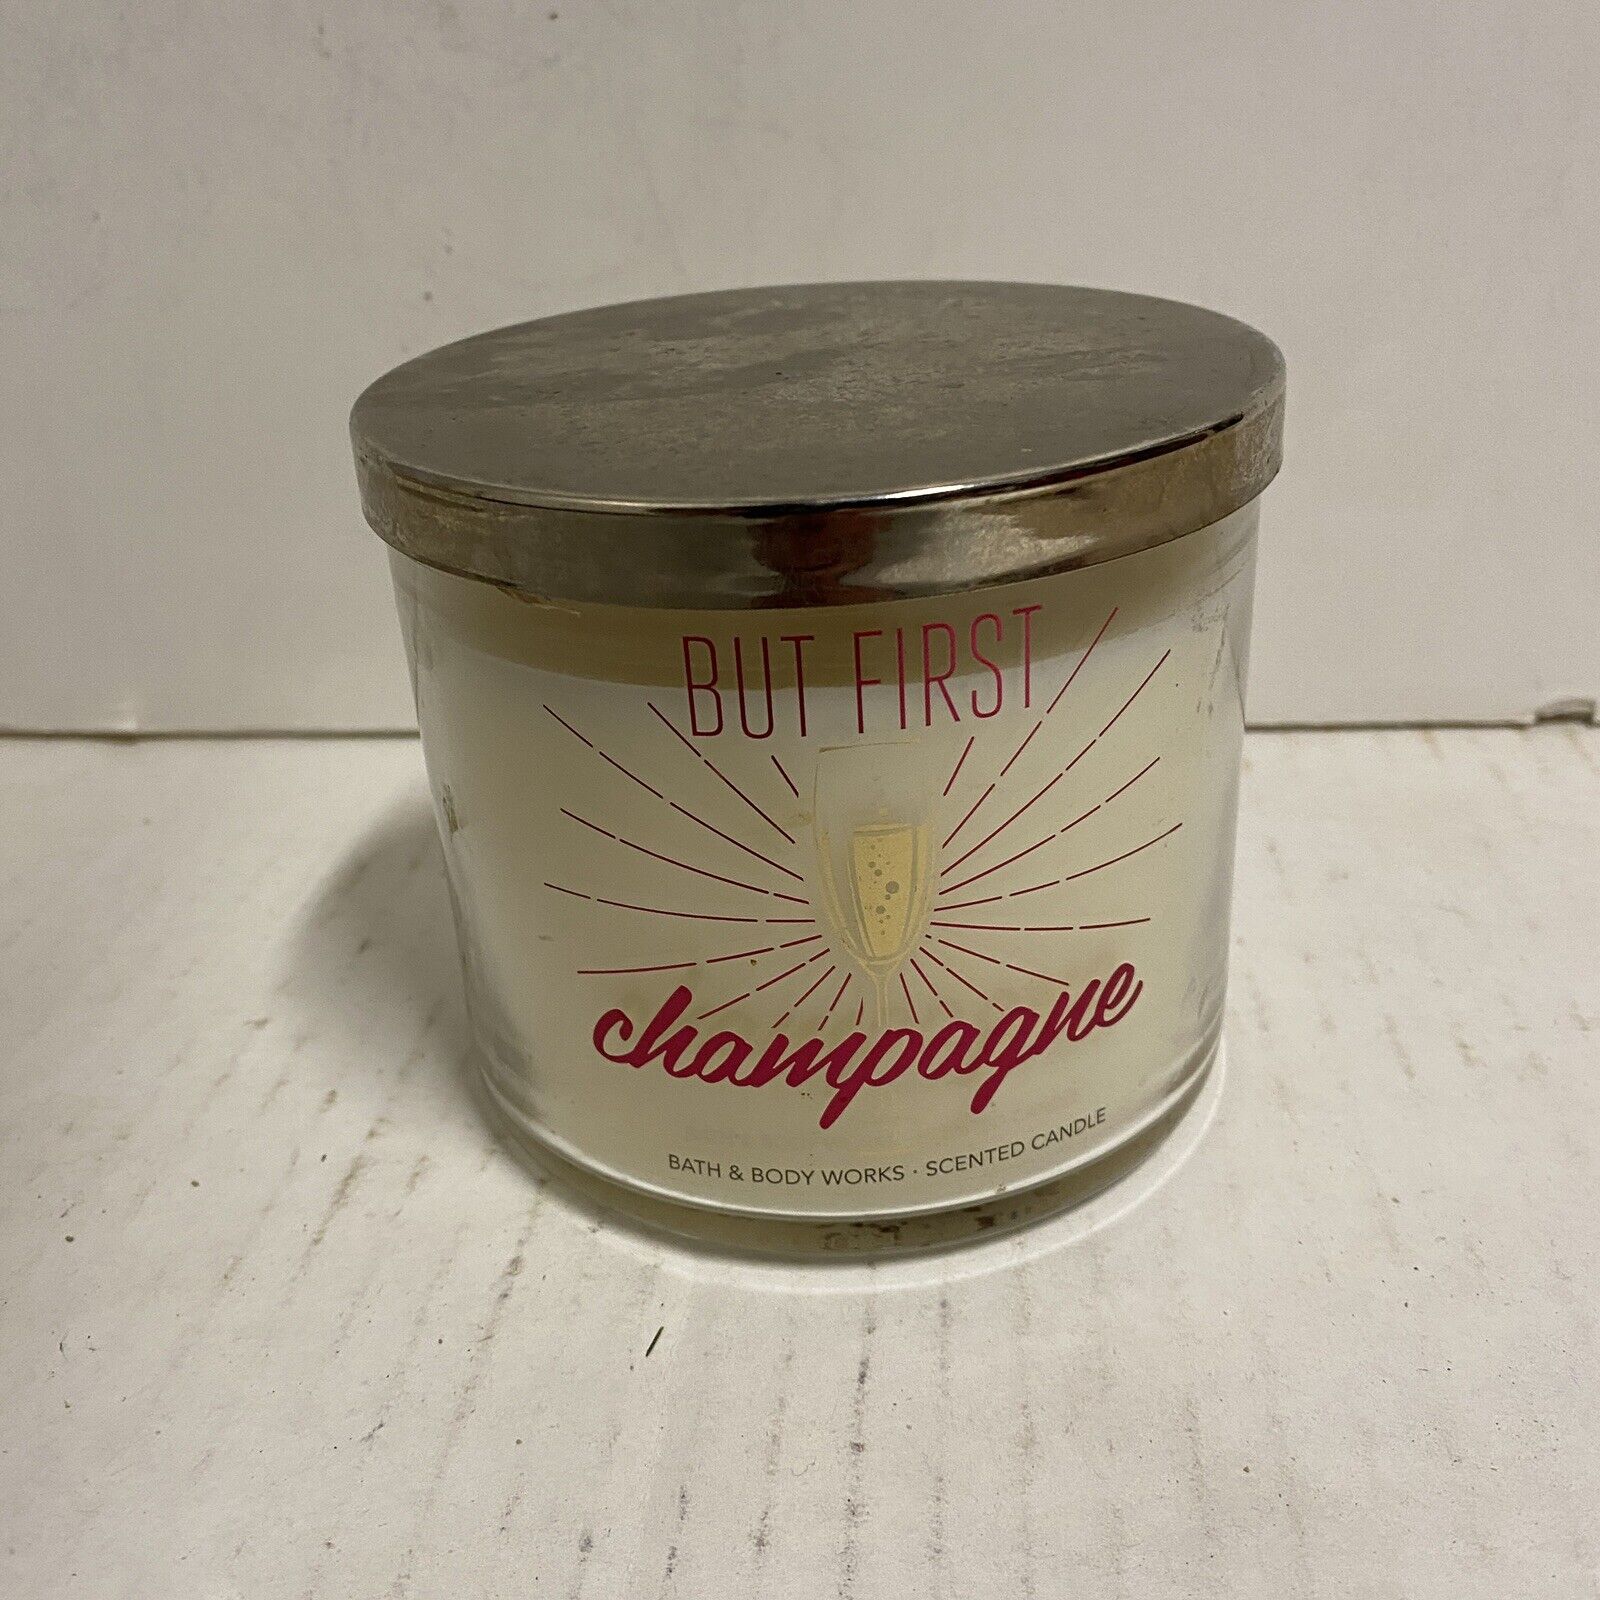 But First Champagne Bath Body Works Candle HTF